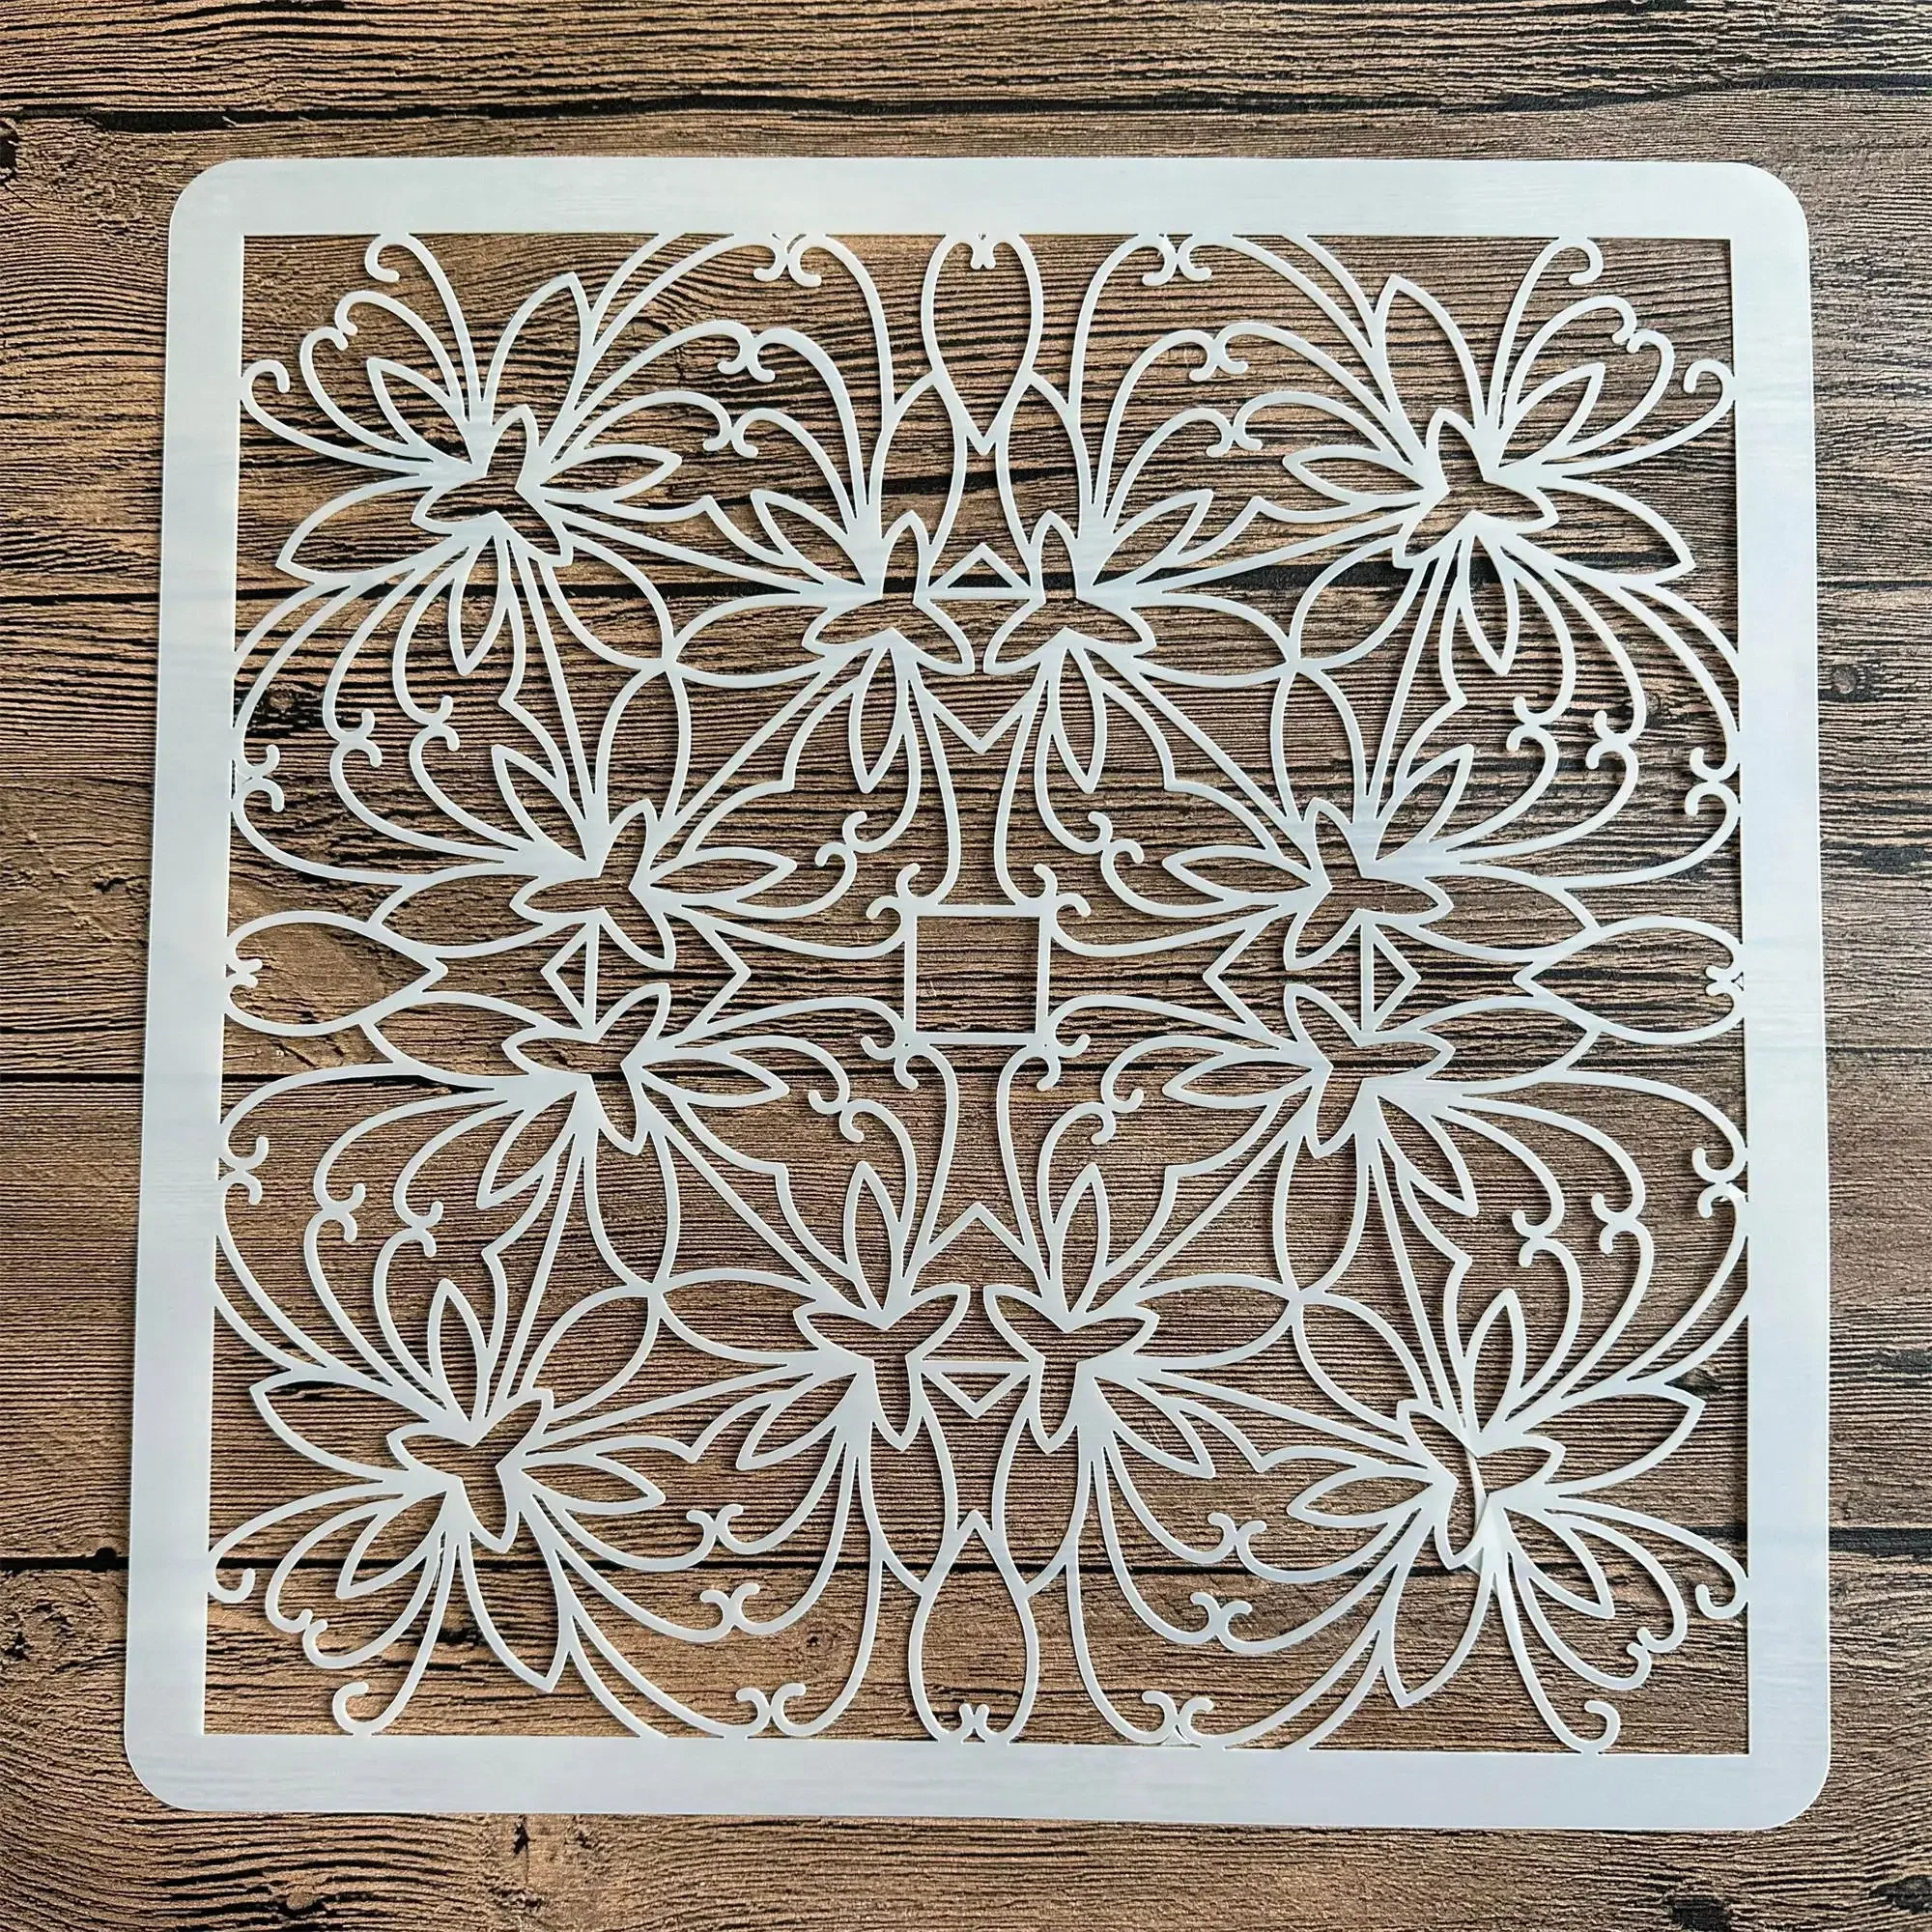 Mandala stencils diy mold for painting stencils stamped photo album embossed paper card on wood, fabric,wall 30 * 30cm size a4 29 21cm diy stencils wall painting scrapbook coloring embossing album decorative paper card template wall cake stencil